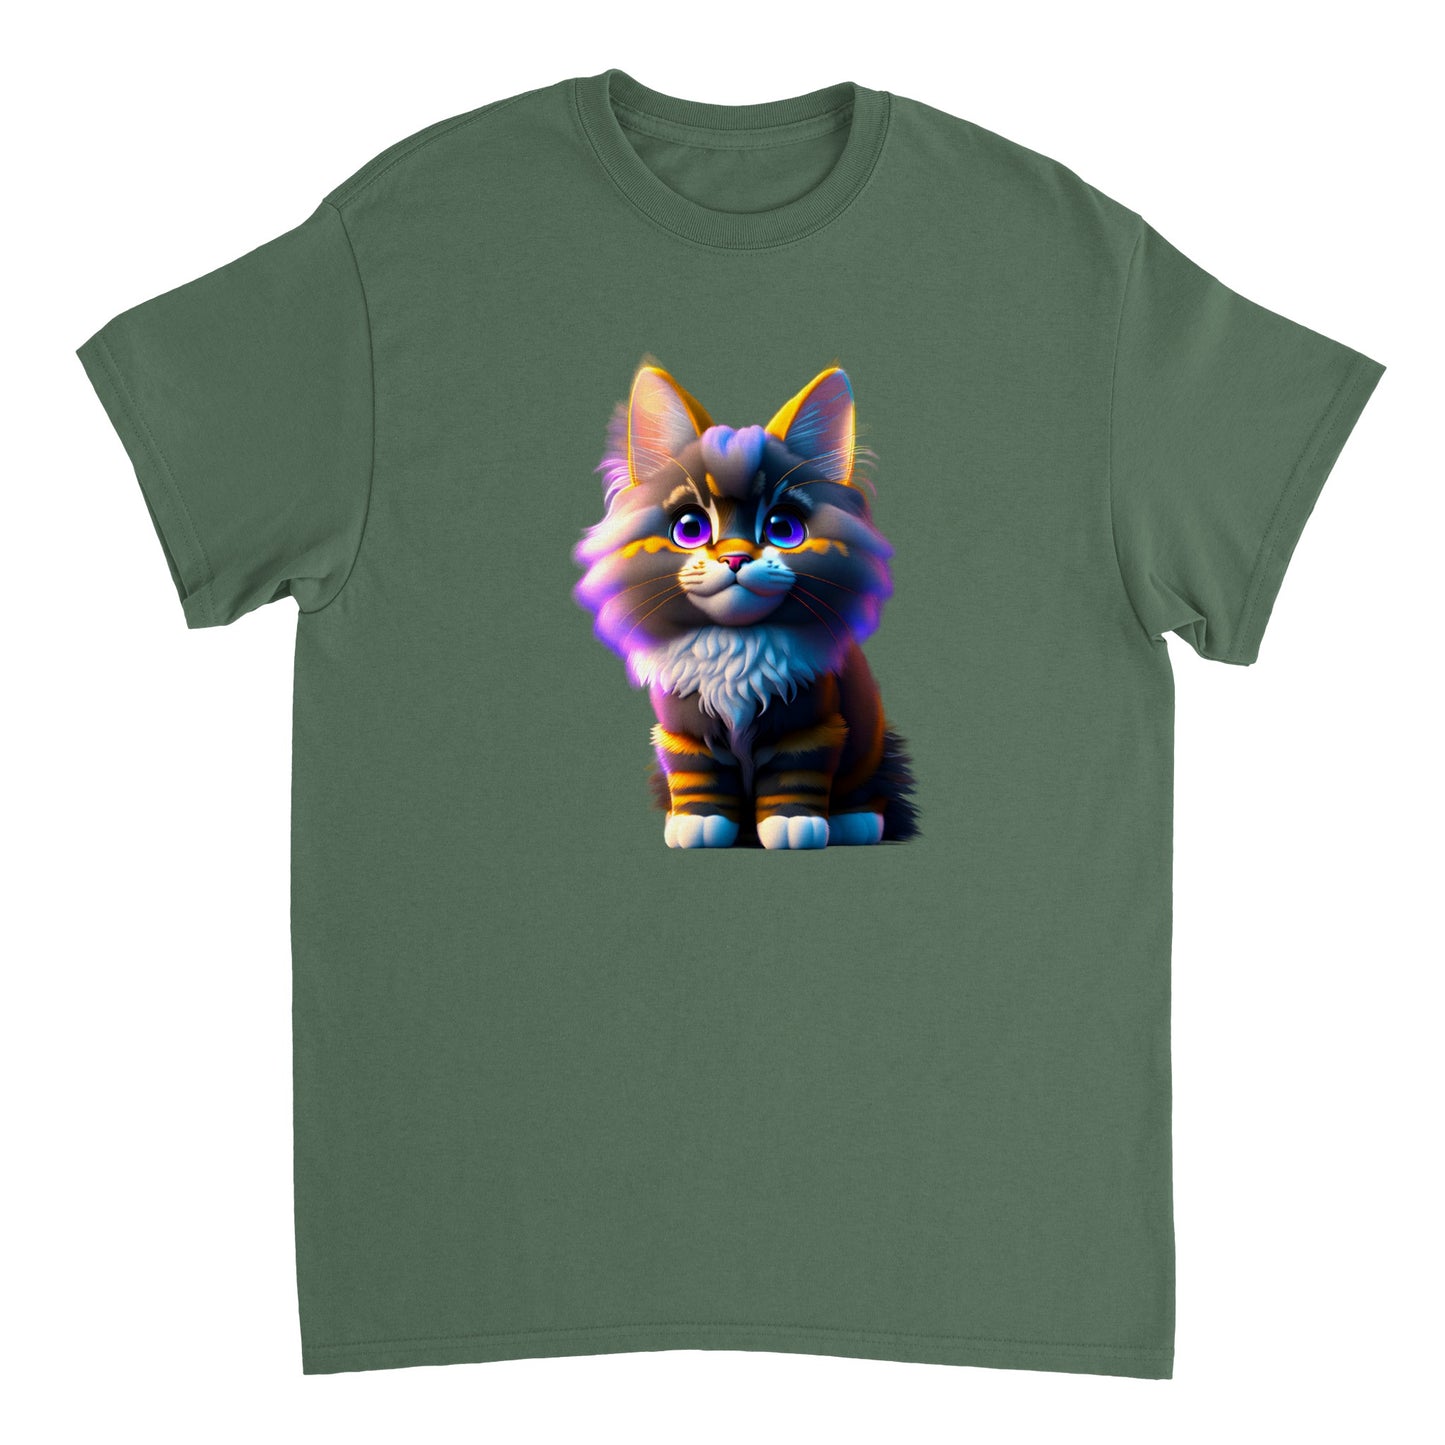 Adorable, Cool, Cute Cats and Kittens Toy - Heavyweight Unisex Crewneck T-shirt 20